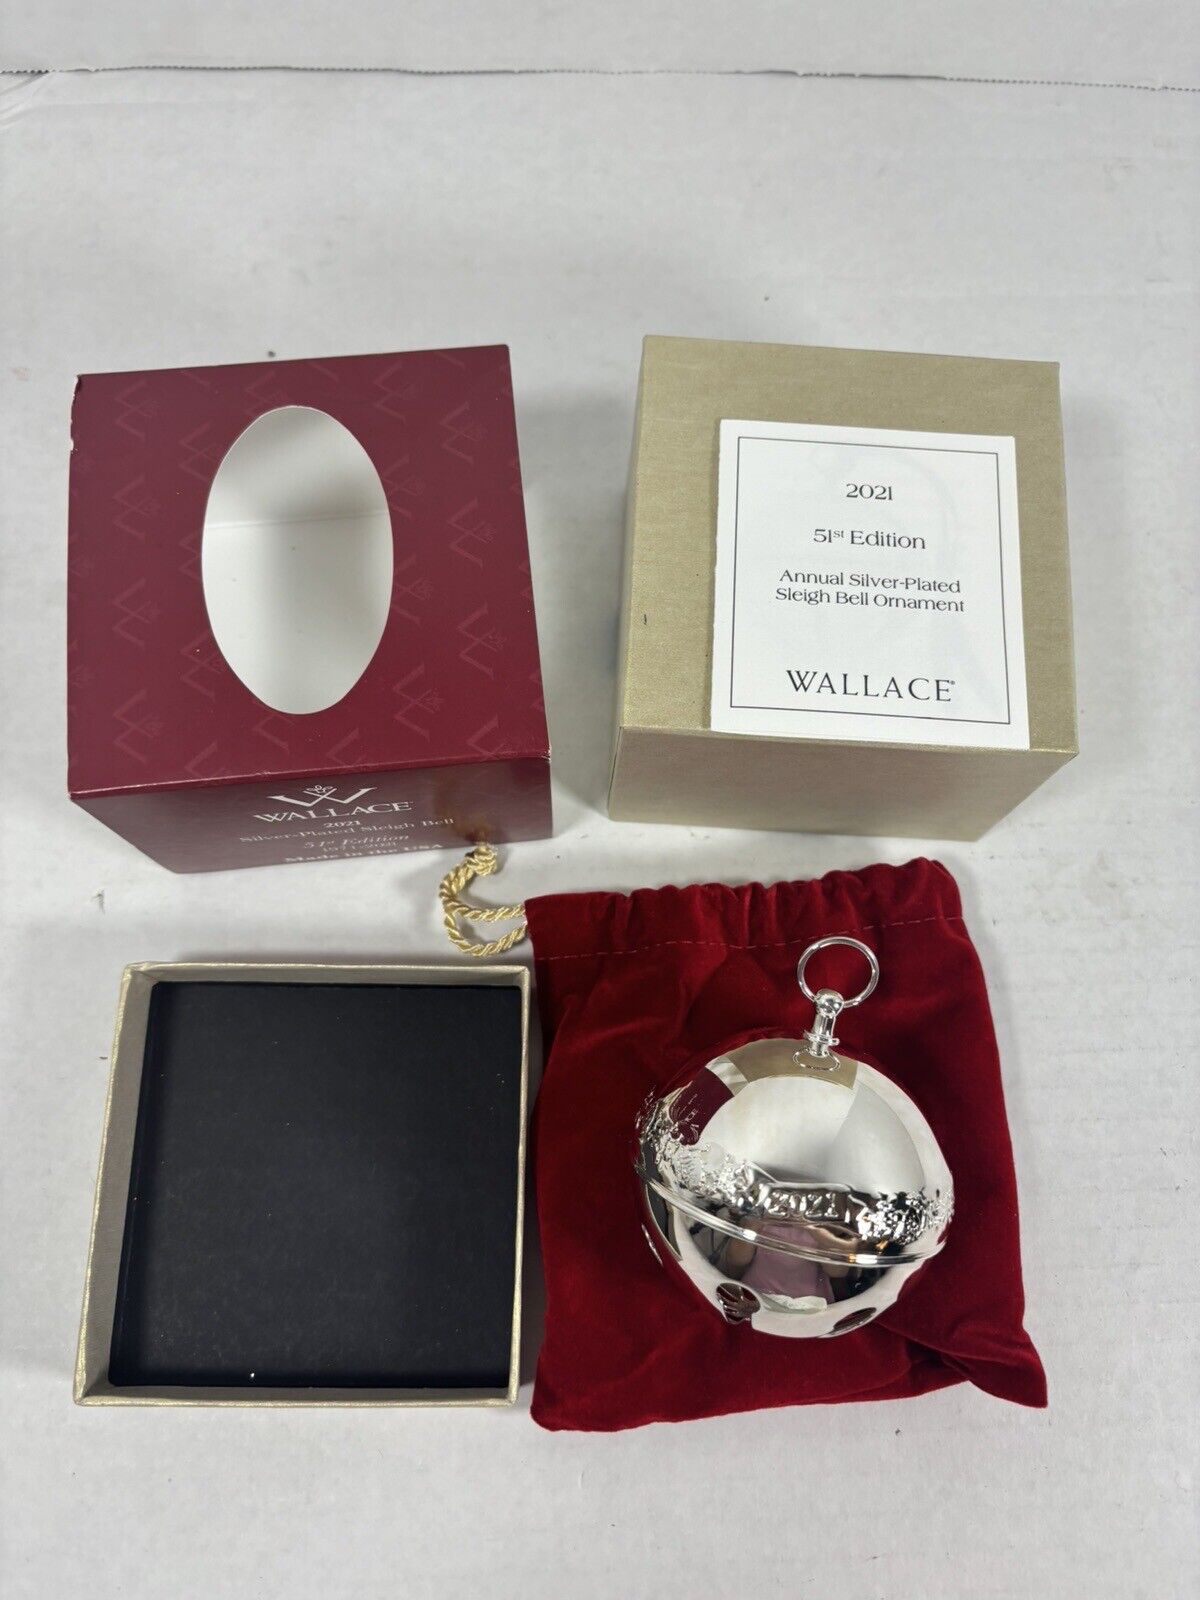 Wallace 51St Edition 2021 Silver Plated Sleigh Bell Ornament Silver Christmas